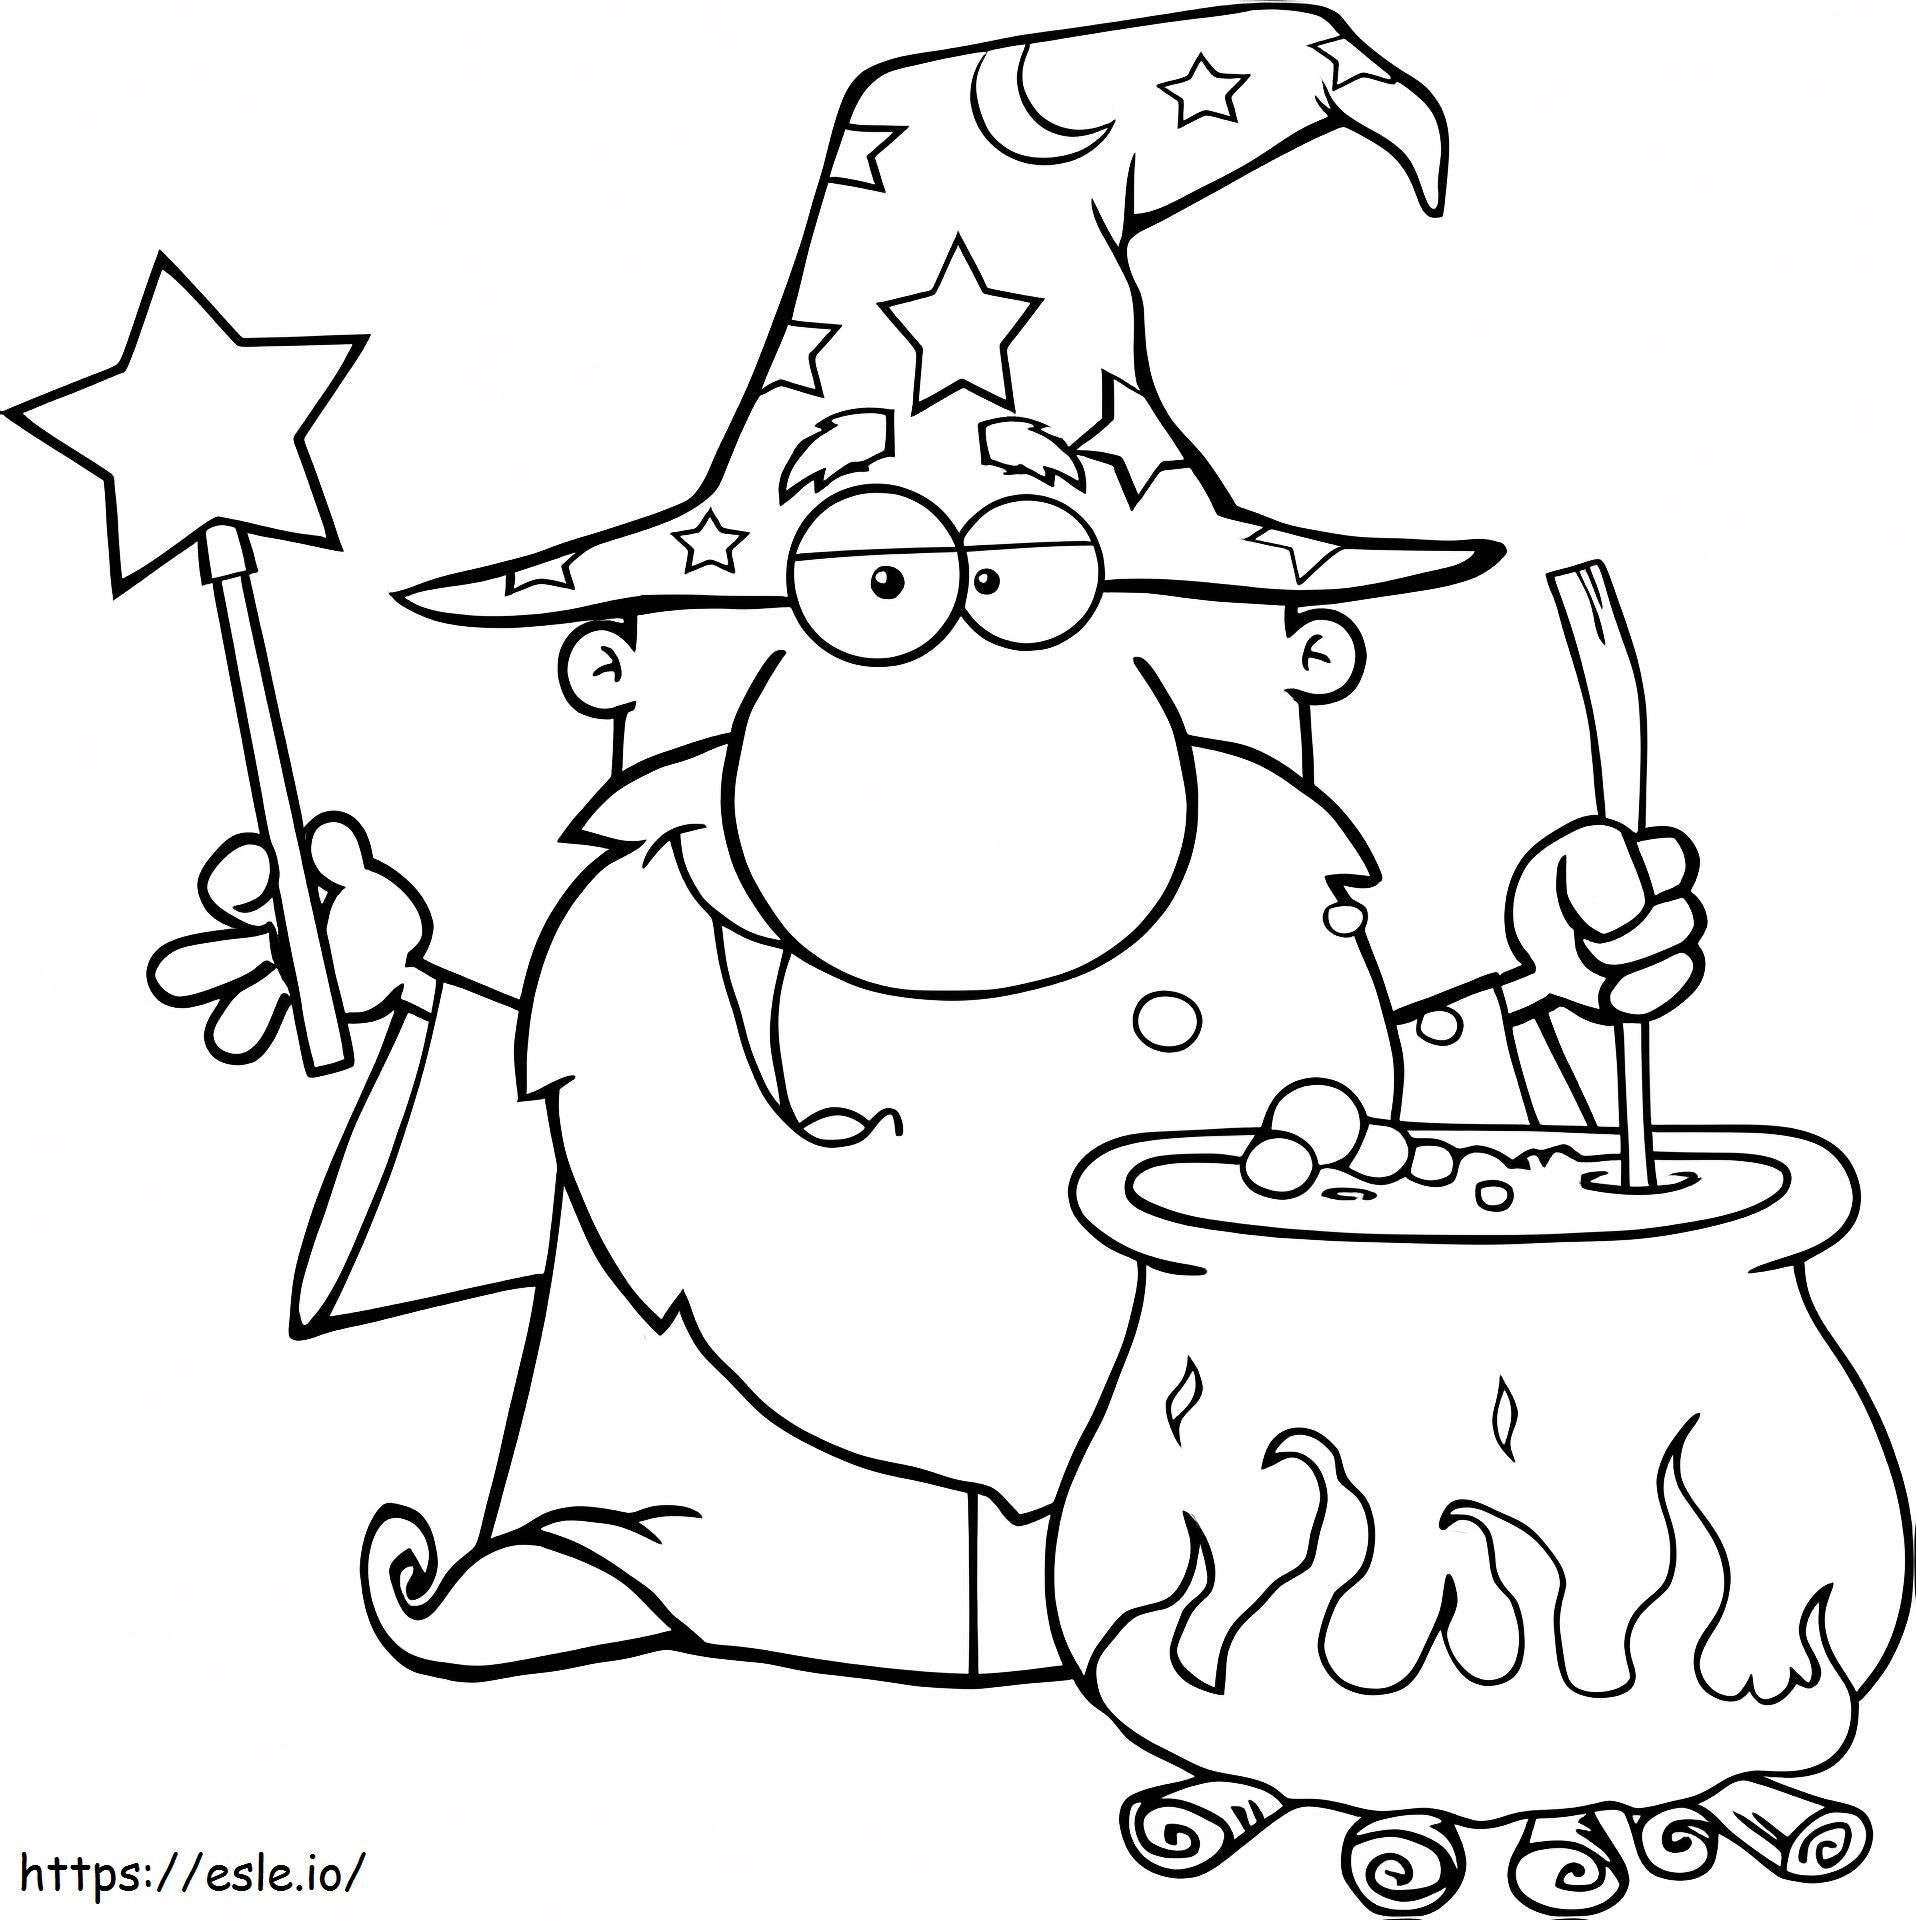 Wizard Waving With Magic Wand And Brewing A Potion coloring page